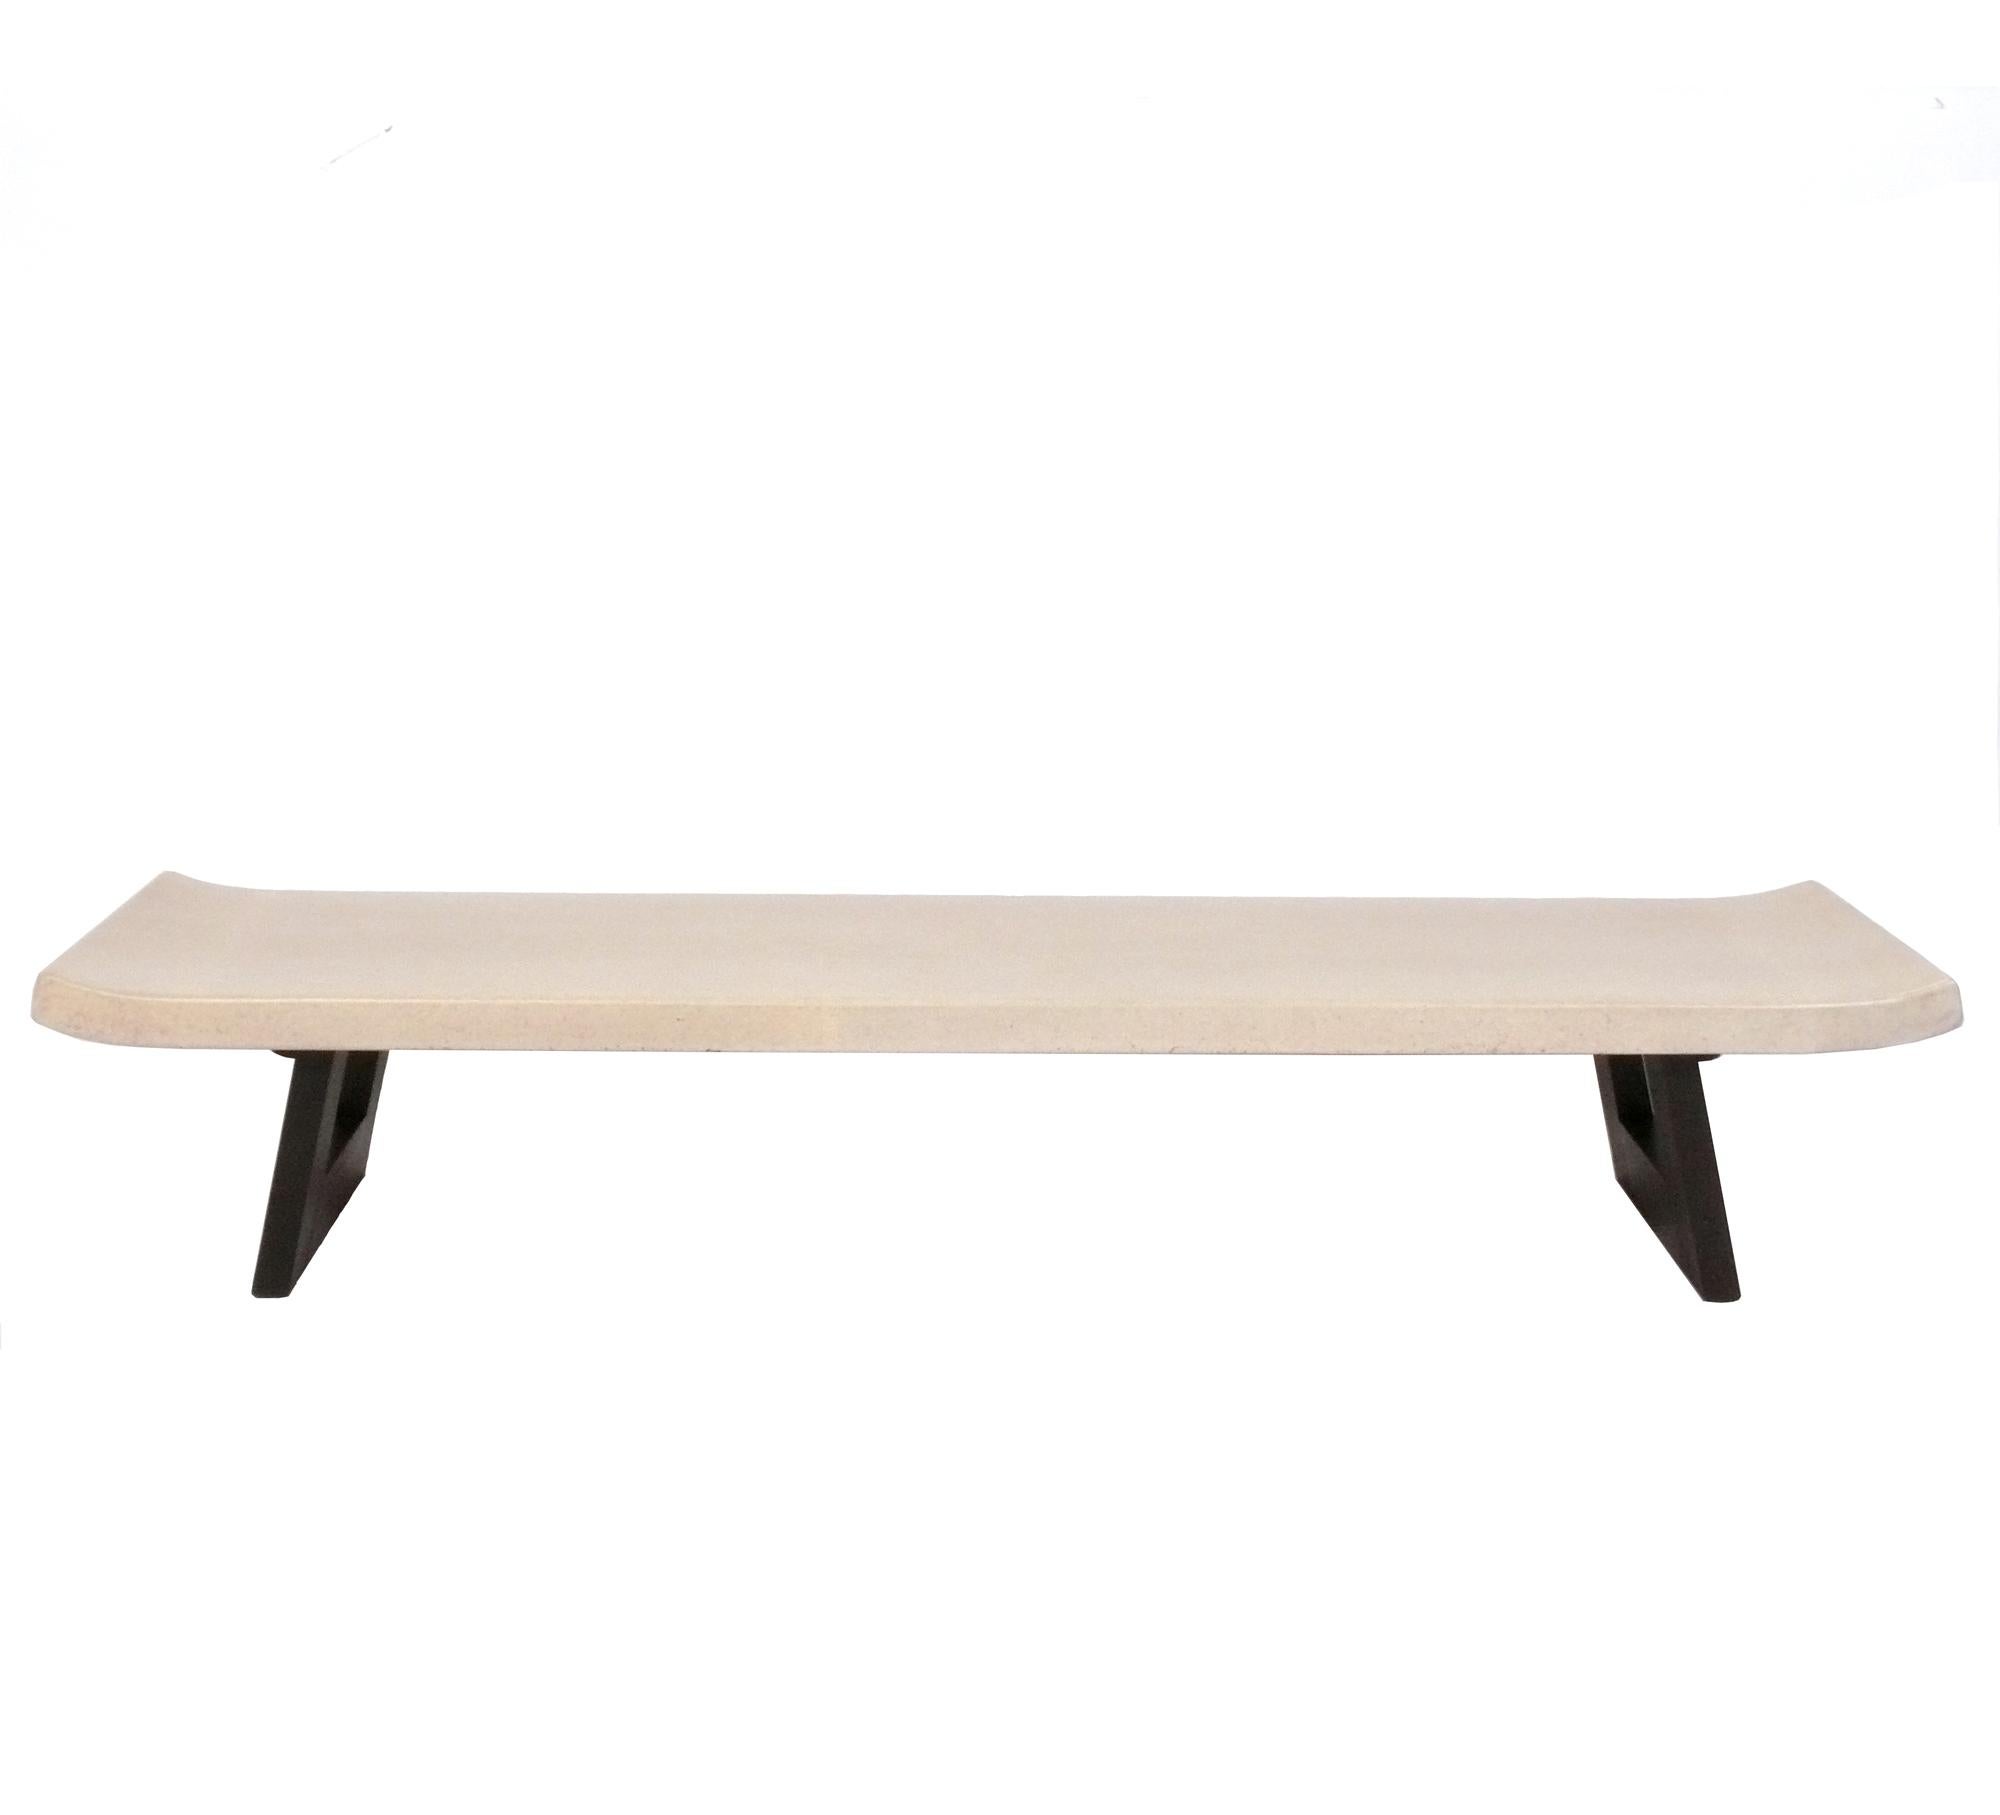 Curvaceous Cork Top Coffee Table or Bench, designed by Paul Frankl for Johnson Furniture, American, circa 1940s. This piece has been recently refinished and is ready to use.